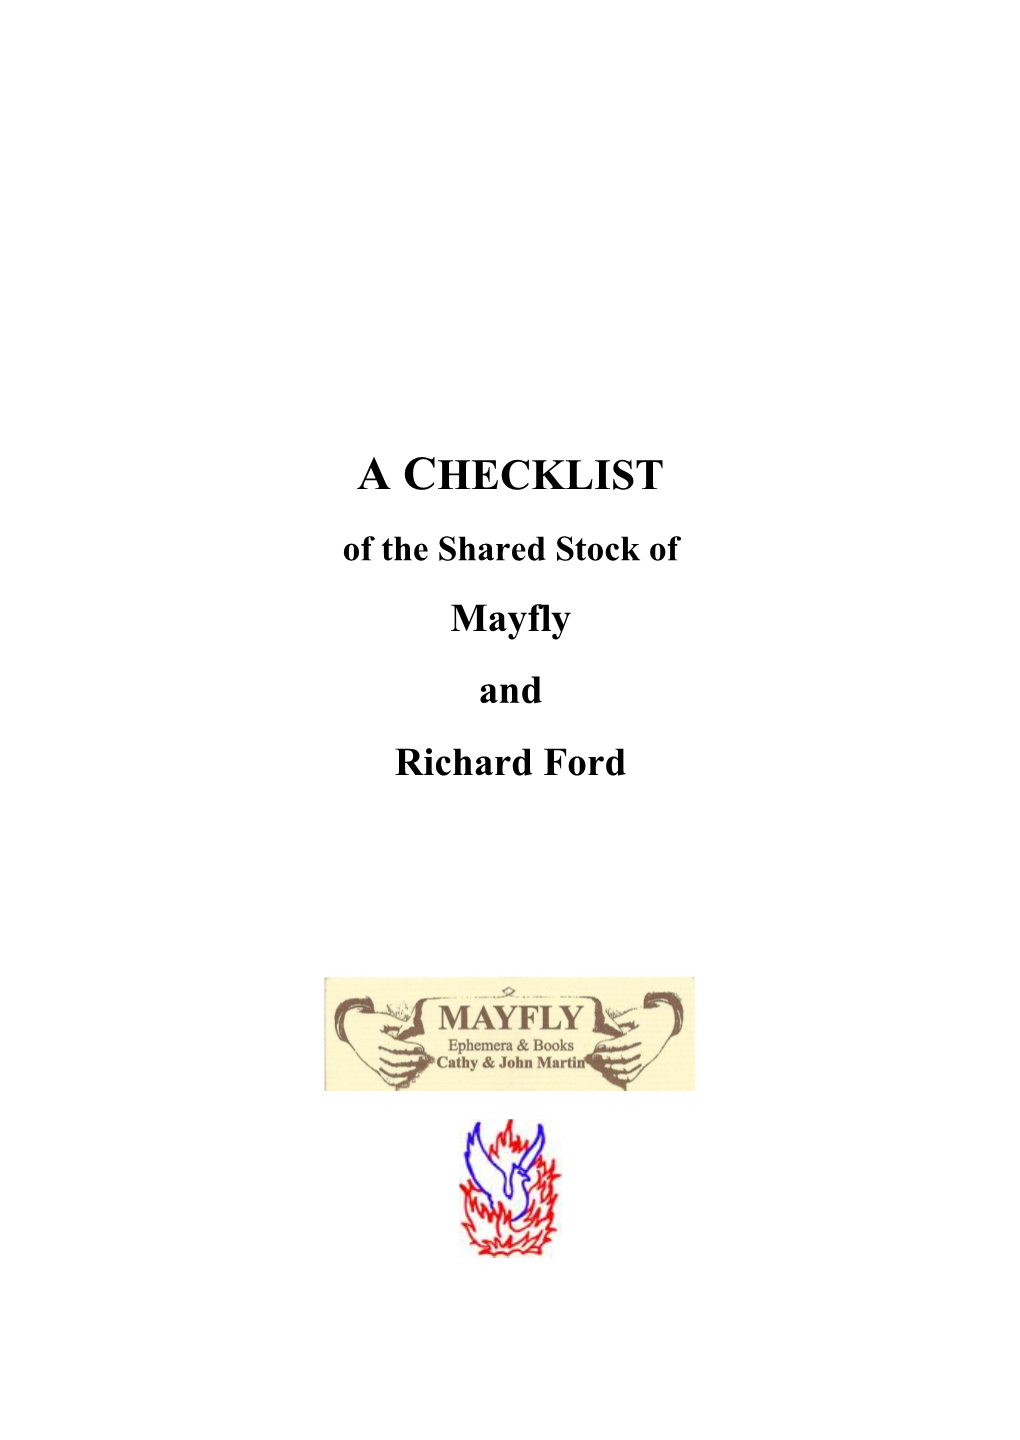 Of the Shared Stock of Mayfly and Richard Ford